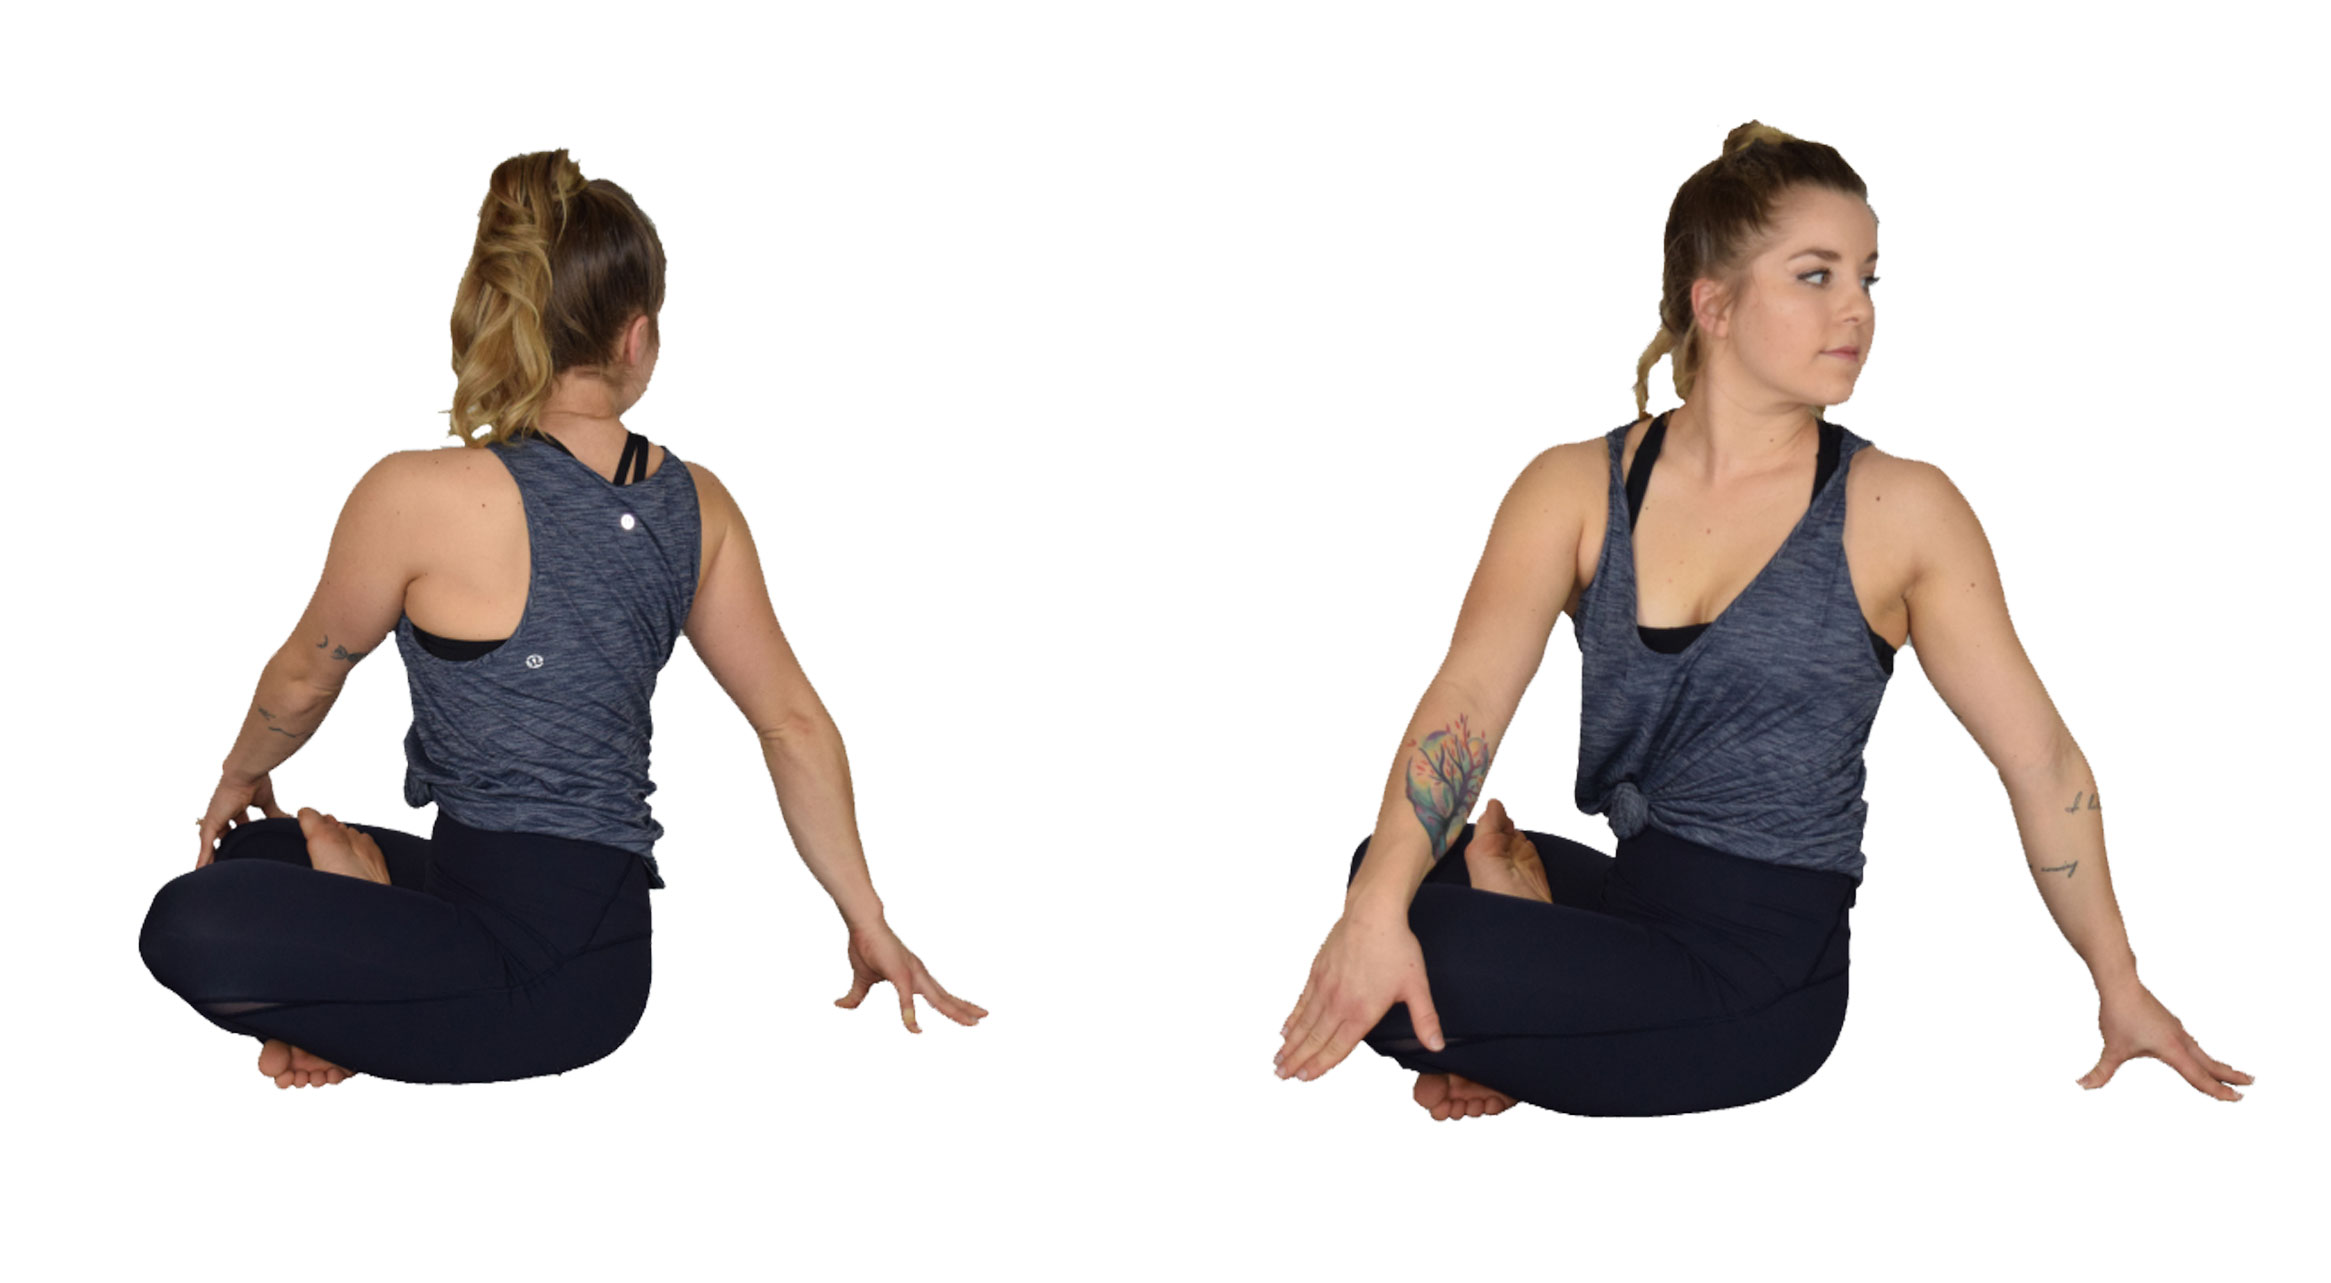 A young woman demonstrating the starting and finishing position for the seated twist yoga pose. For a complete description of the movements, call SDSU Extension at 605-688-6729.